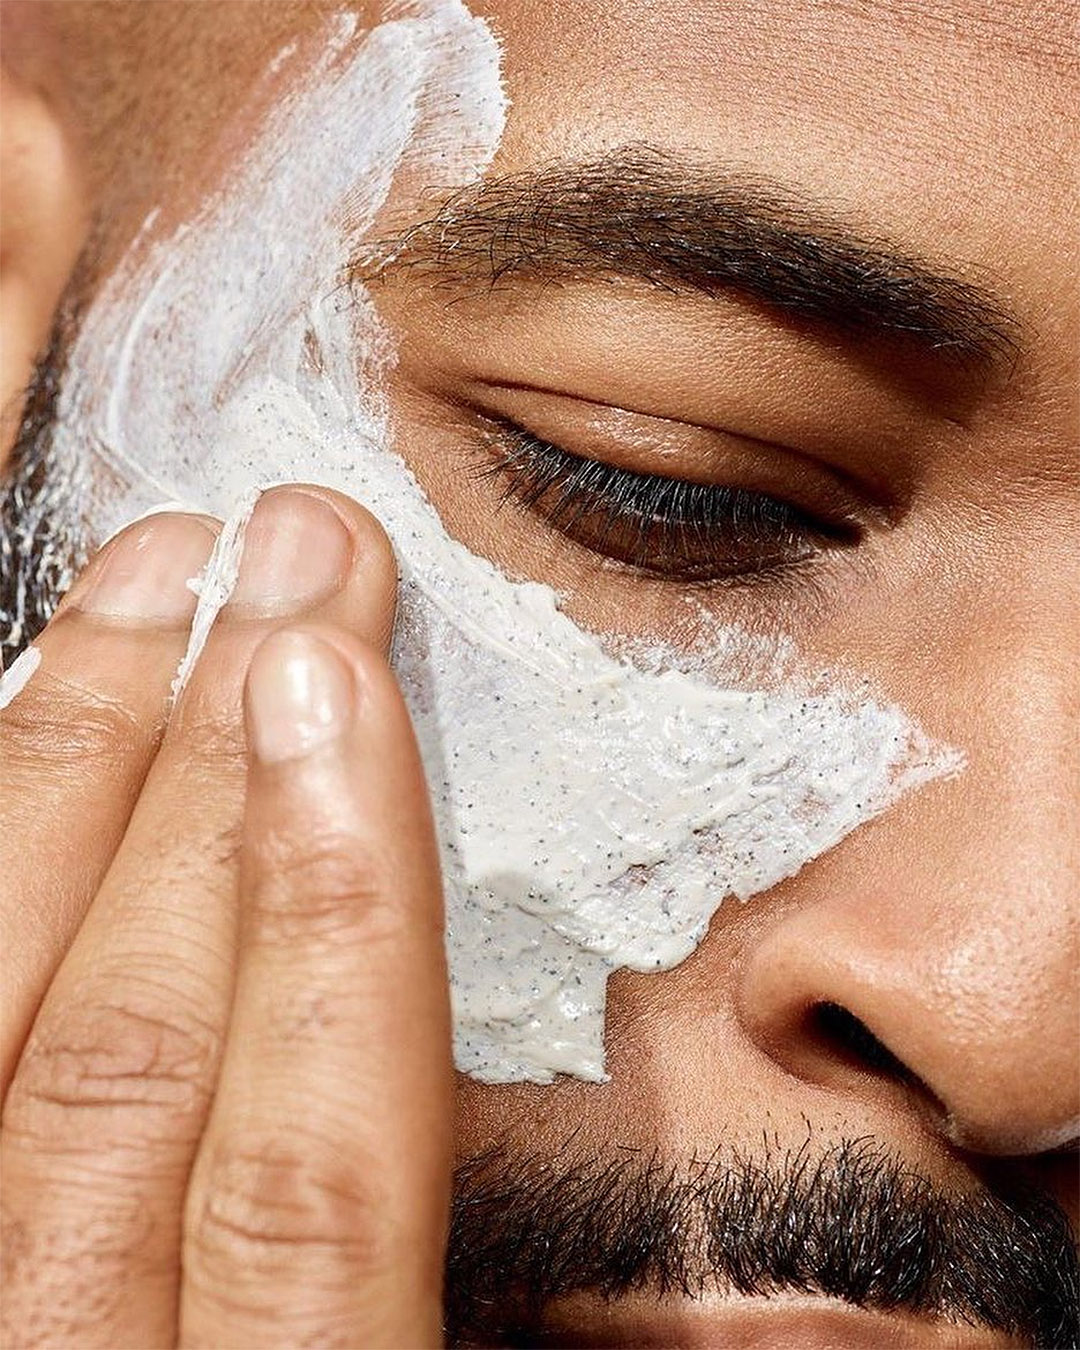 A man applies skincare at Equipoise.